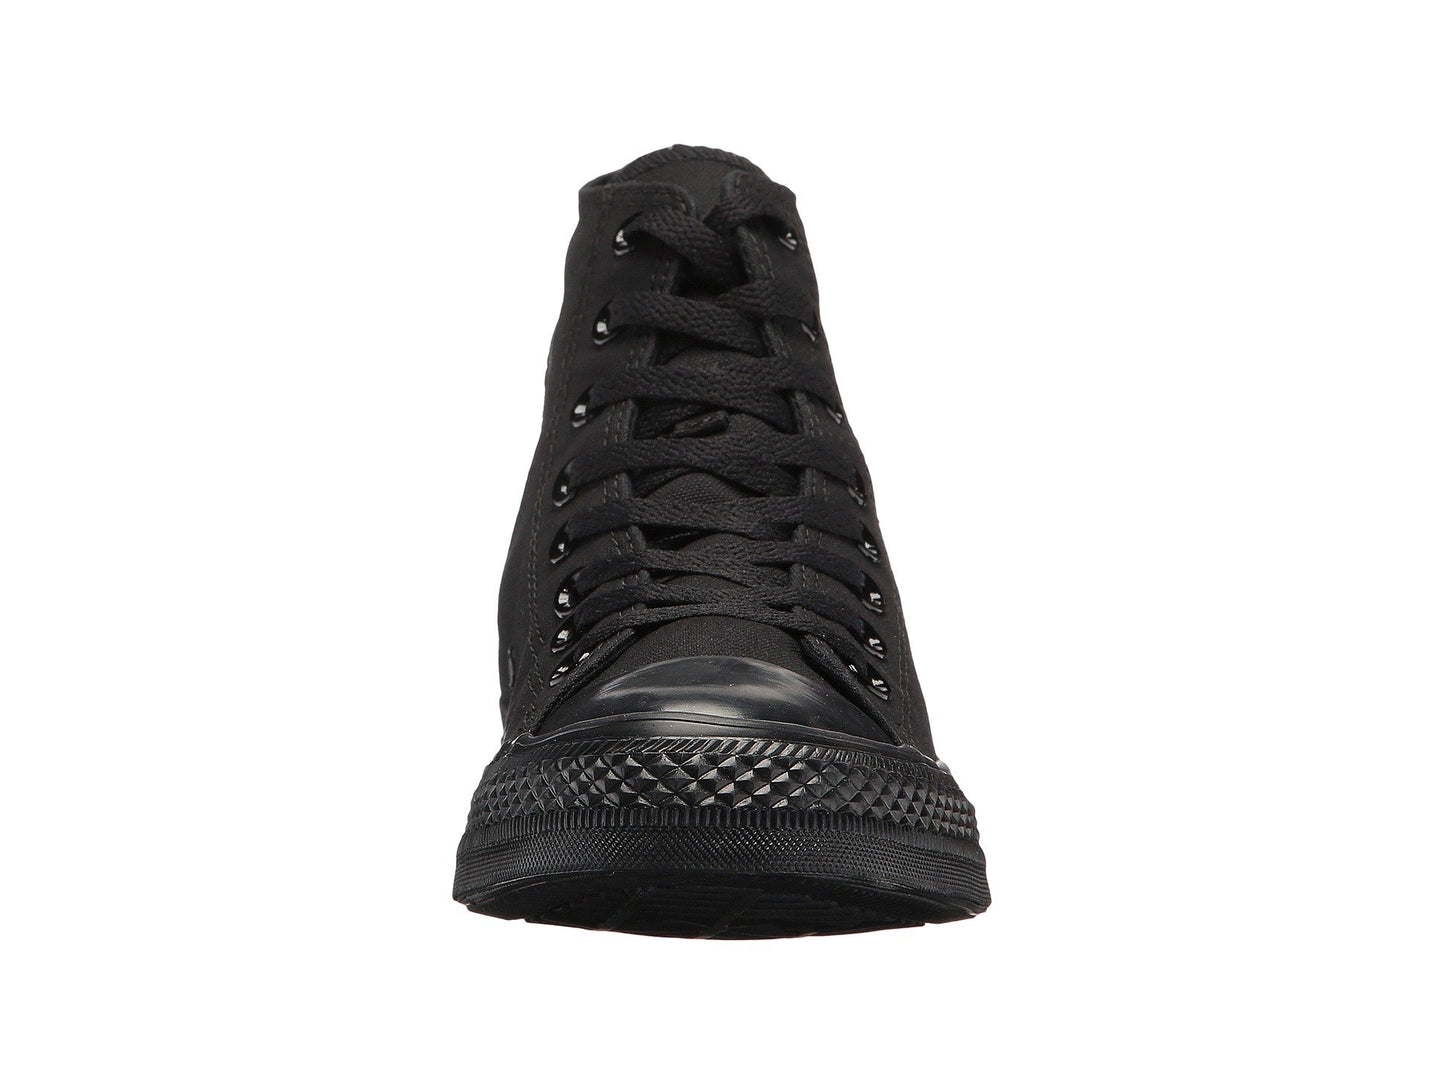 Converse Adult Chuck Taylor All Star Classic High Top Black Monochrome